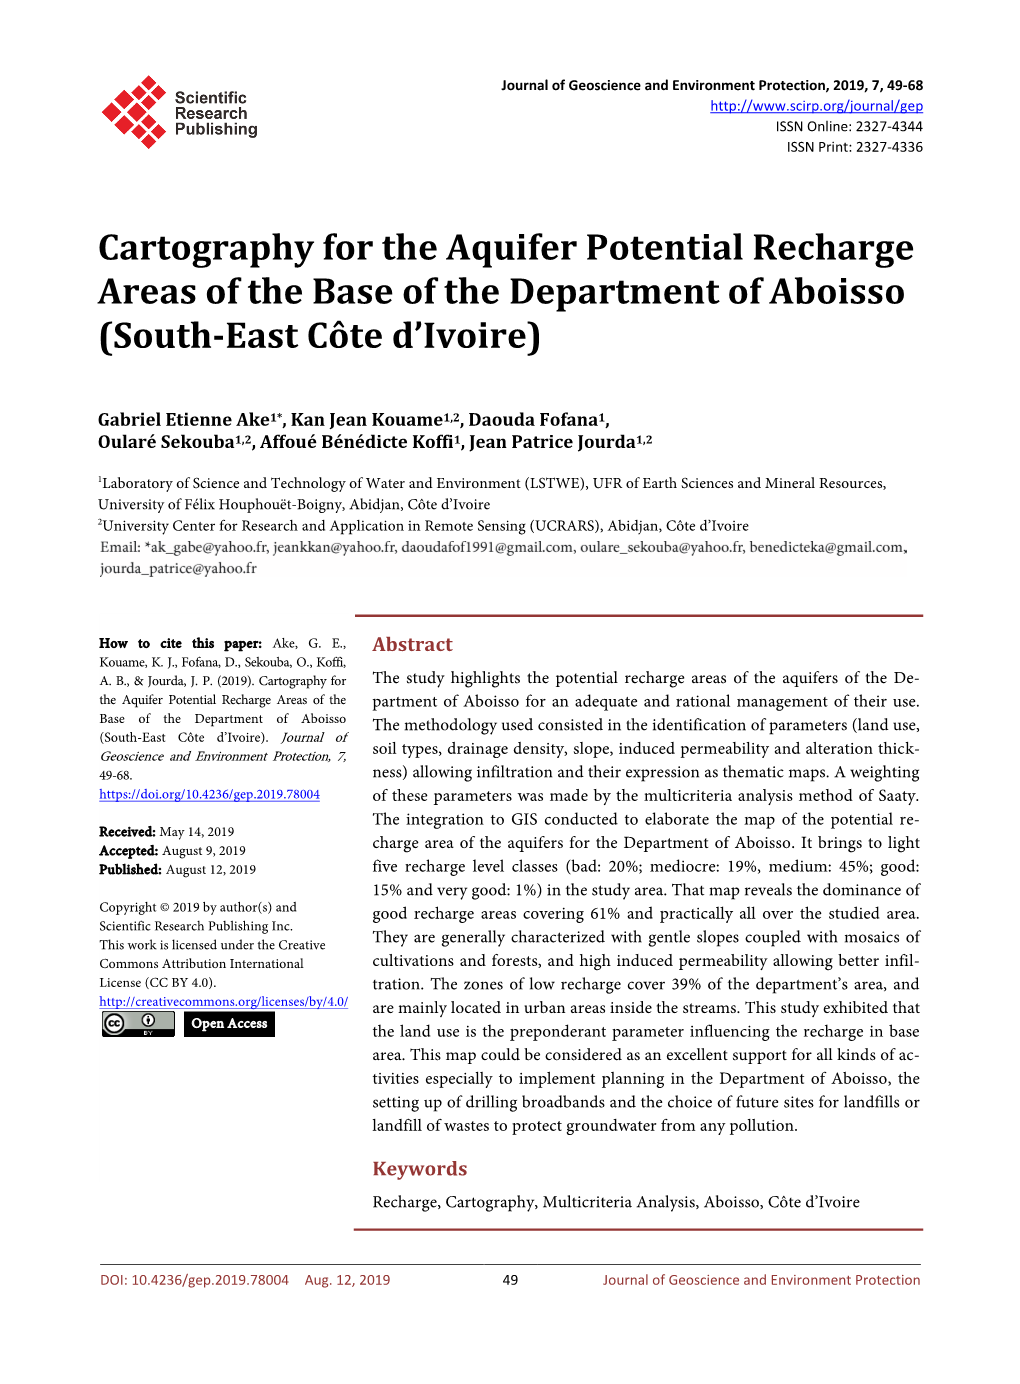 Cartography for the Aquifer Potential Recharge Areas of the Base of the Department of Aboisso (South-East Cote D'ivoire)